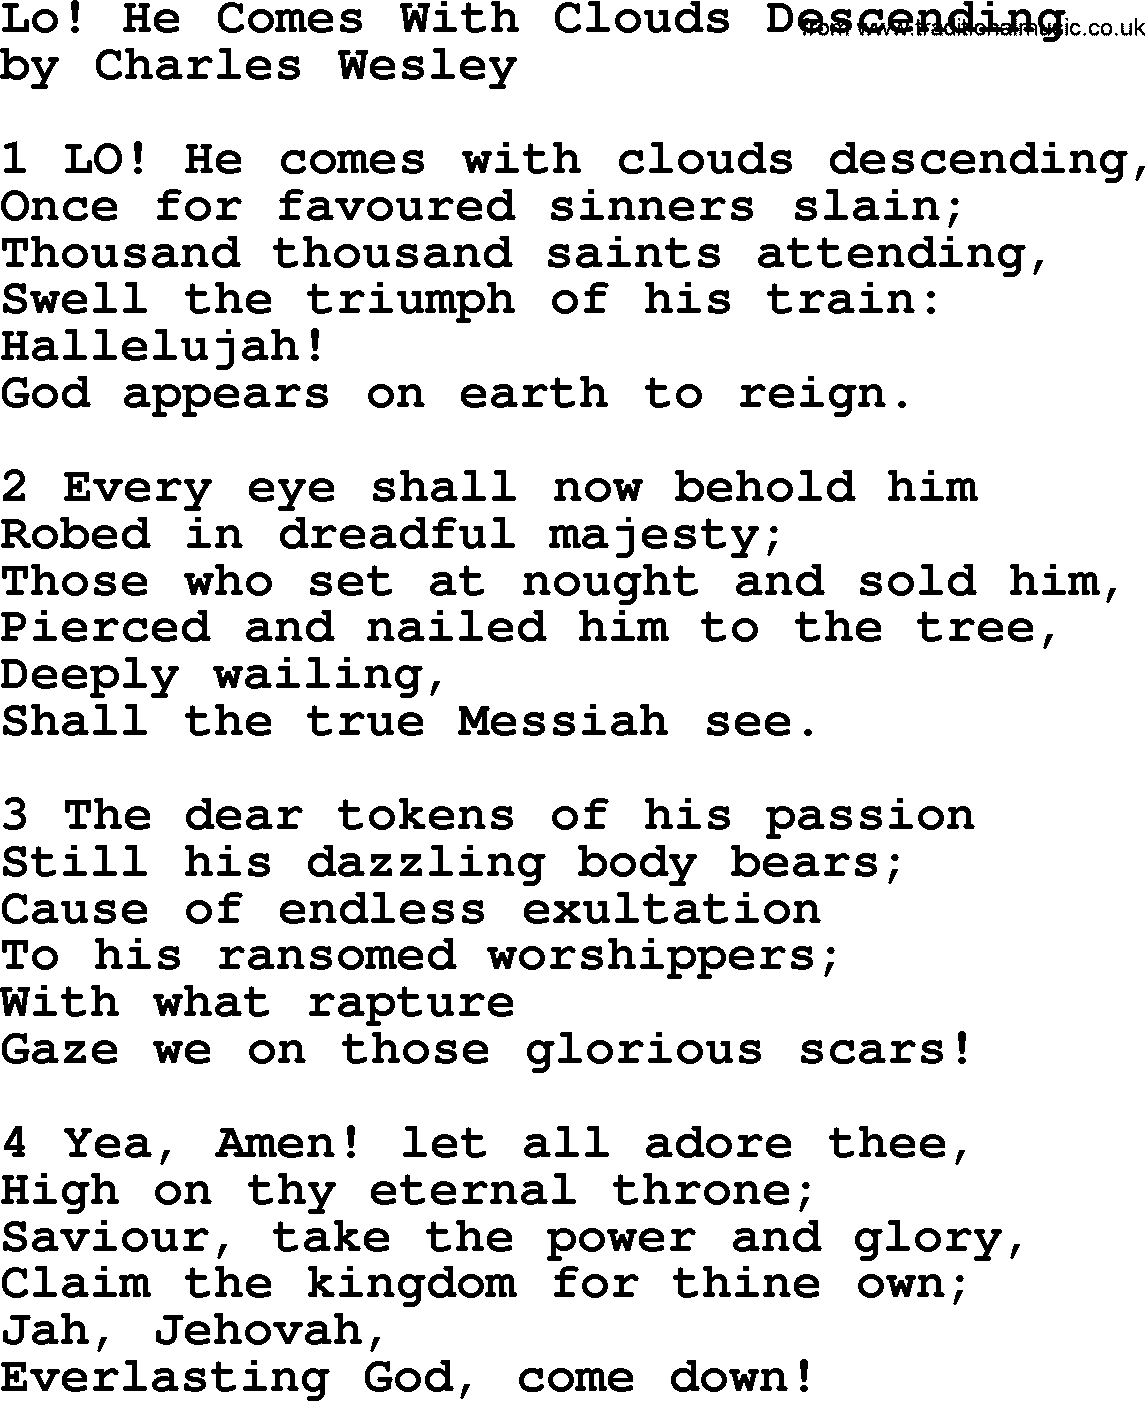 Charles Wesley hymn: Lo! He Comes With Clouds Descending, lyrics